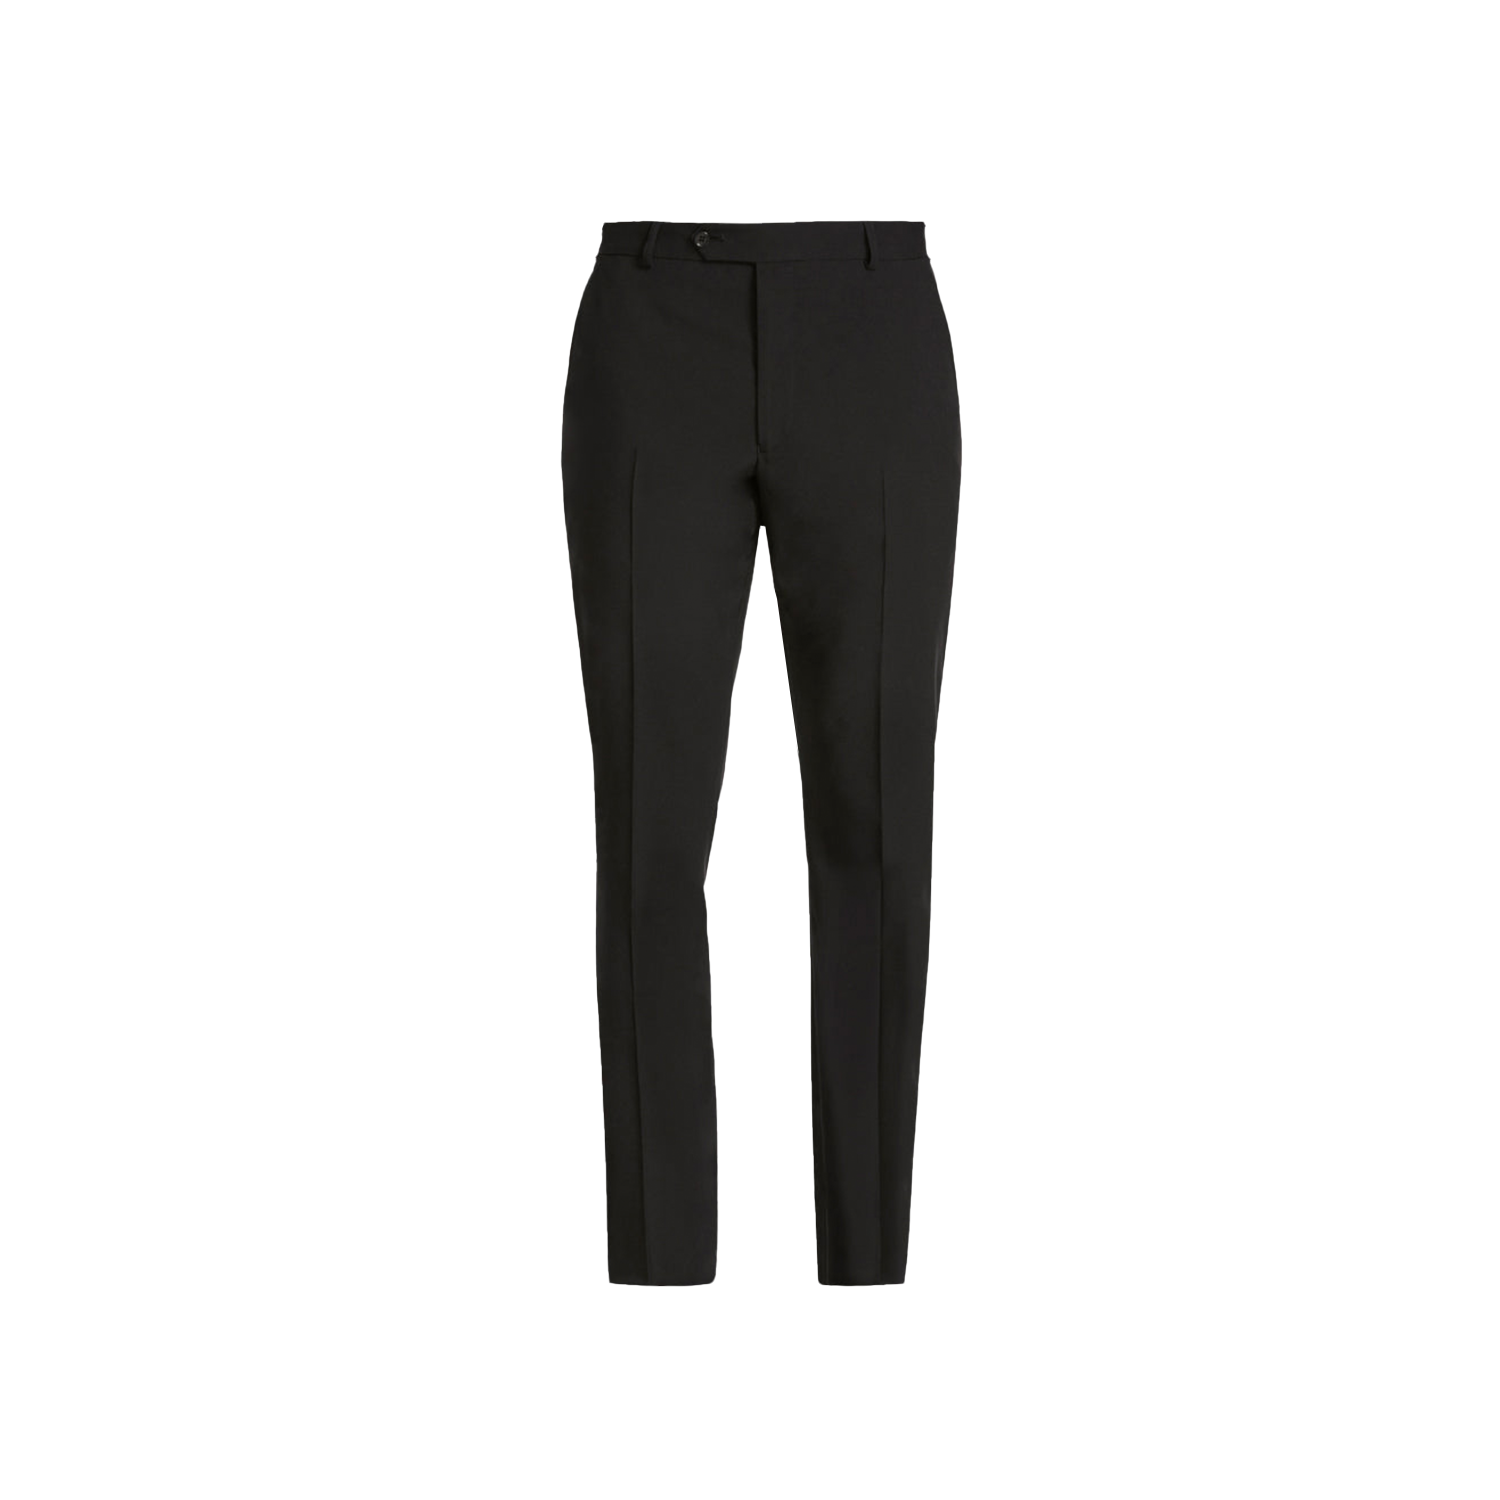 NNT Men's Helix Dry Flat Front Pants - Black - Totally Workwear